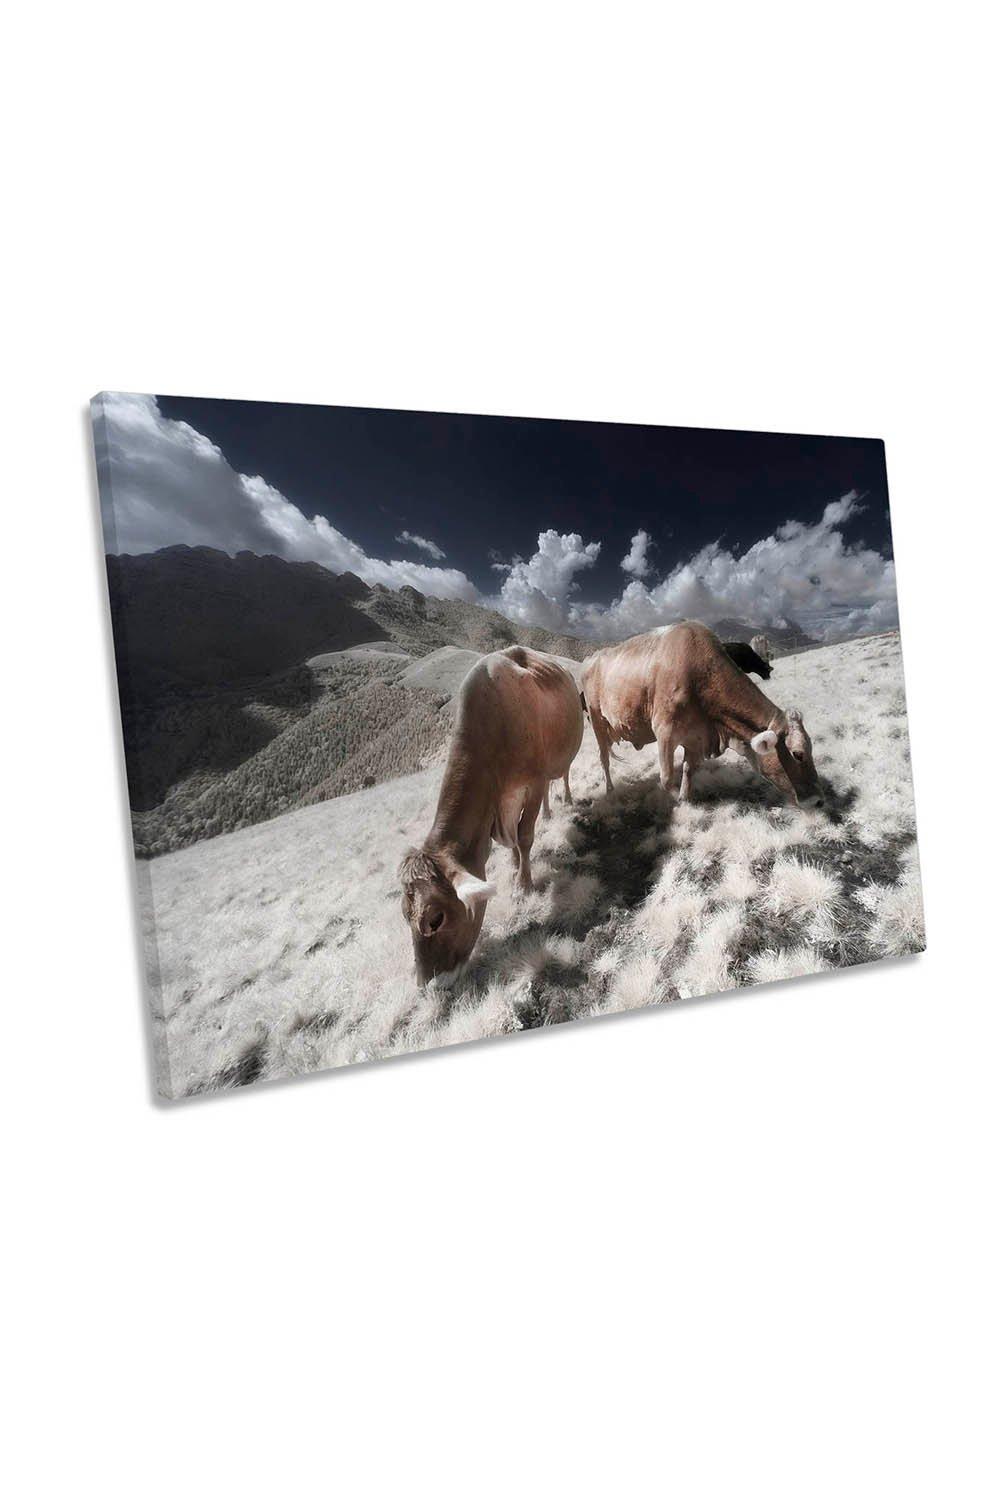 Infrared Cows Cattle Mountains Landscape Canvas Wall Art Picture Print